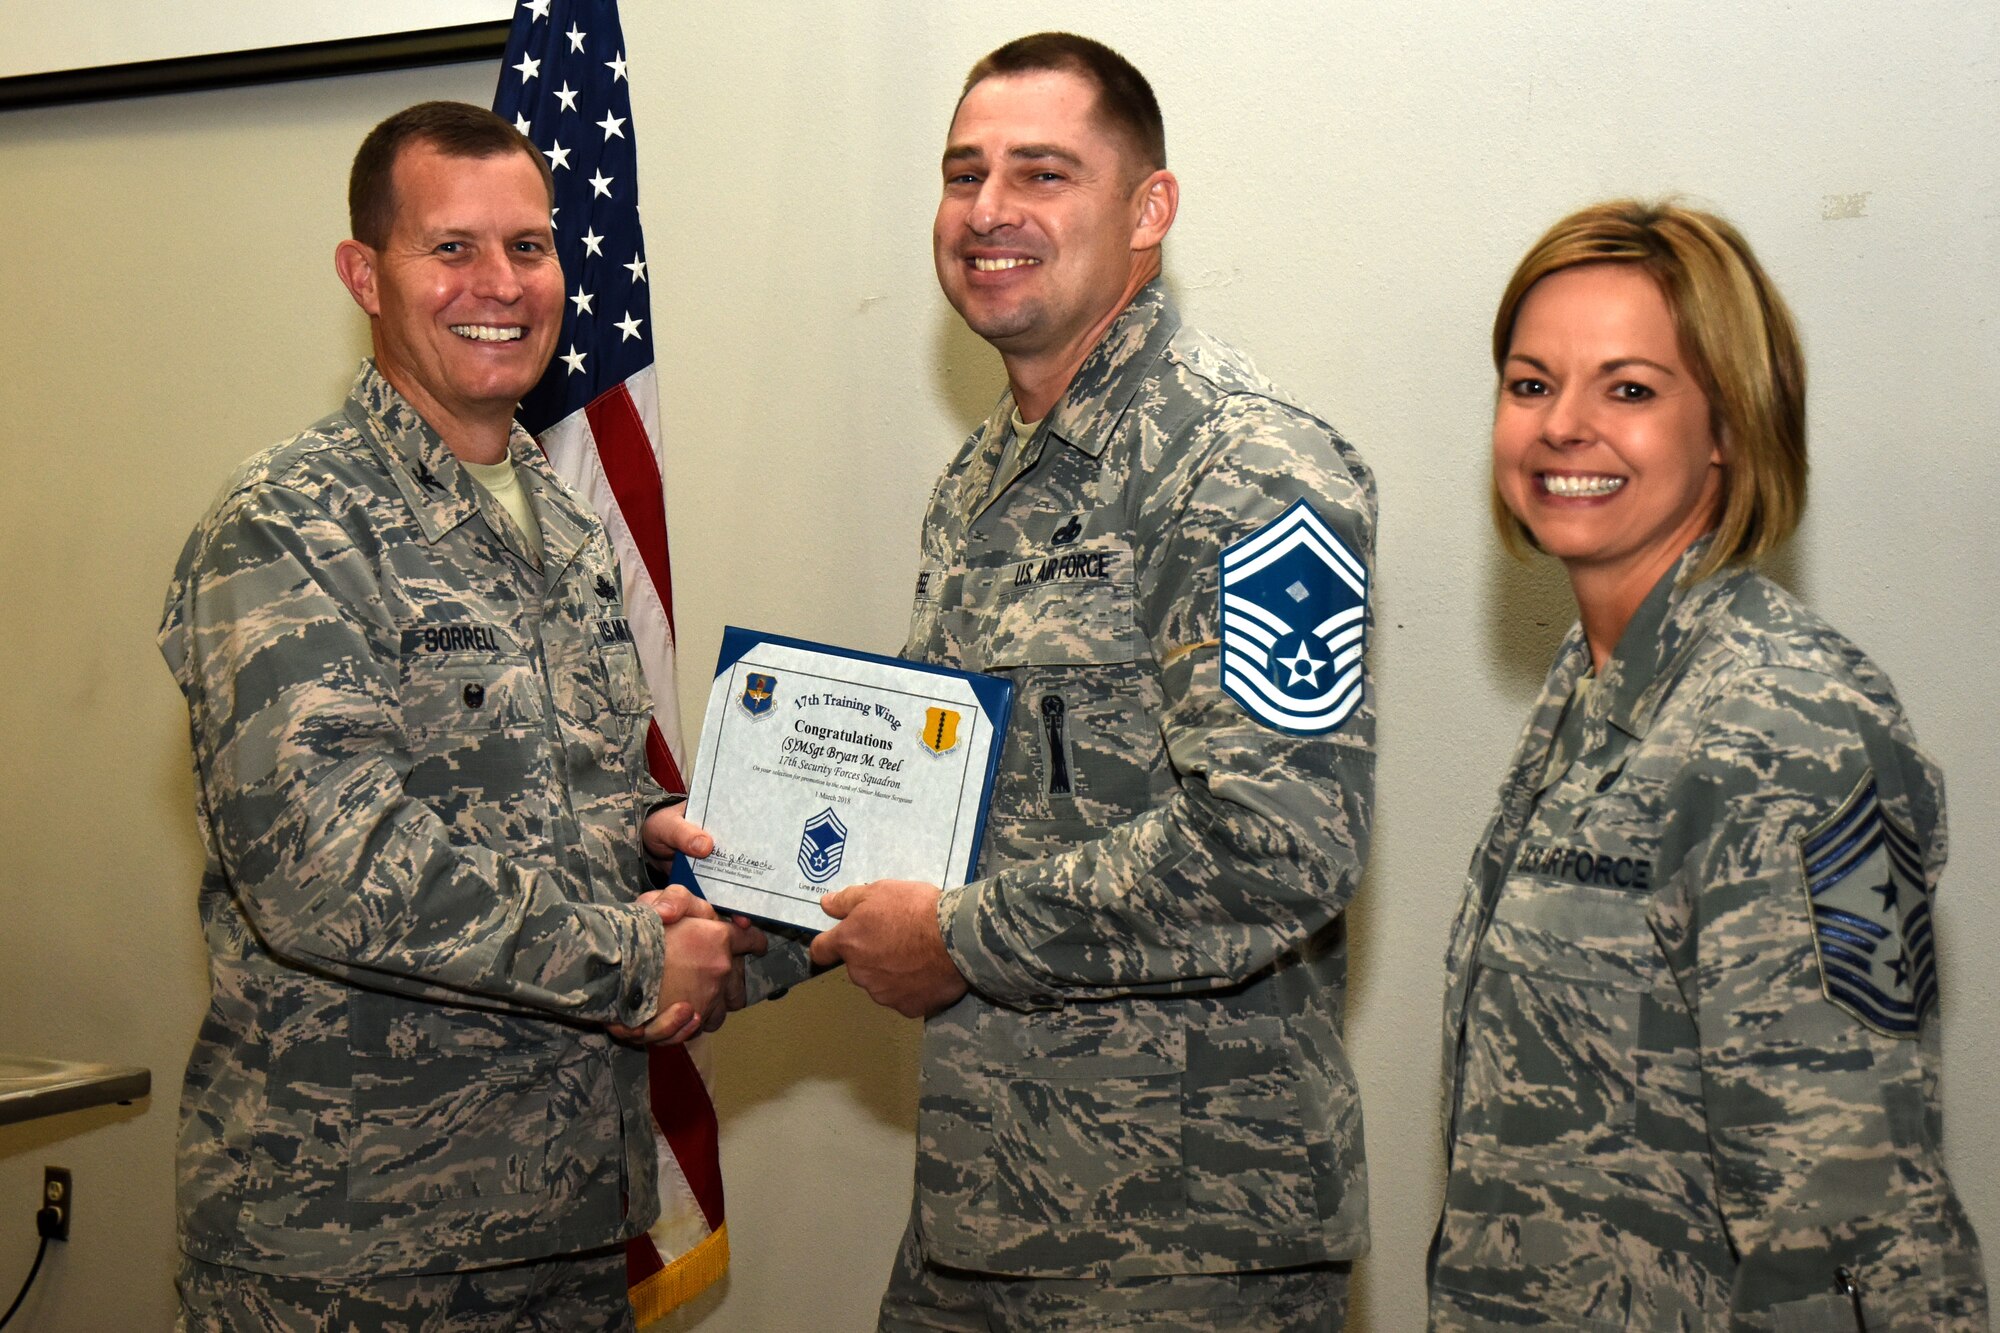 U.S. Air Force Col. Jeffrey Sorrell, 17th Training Wing vice commander, presents Master Sgt. Bryan Peel, 17th Security Forces Squadron first sergeant, a promotion certificate with Chief Master Sgt. Bobbie Reinsche, 17th Training Wing command chief, at the Event Center on Goodfellow Air Force Base, Texas, March 1, 2018. In celebration of individuals being selected for senior master sergeant, a party was held at the Event Center. (U.S. Air Force photo by Airman 1st Class Seraiah Hines/Released)